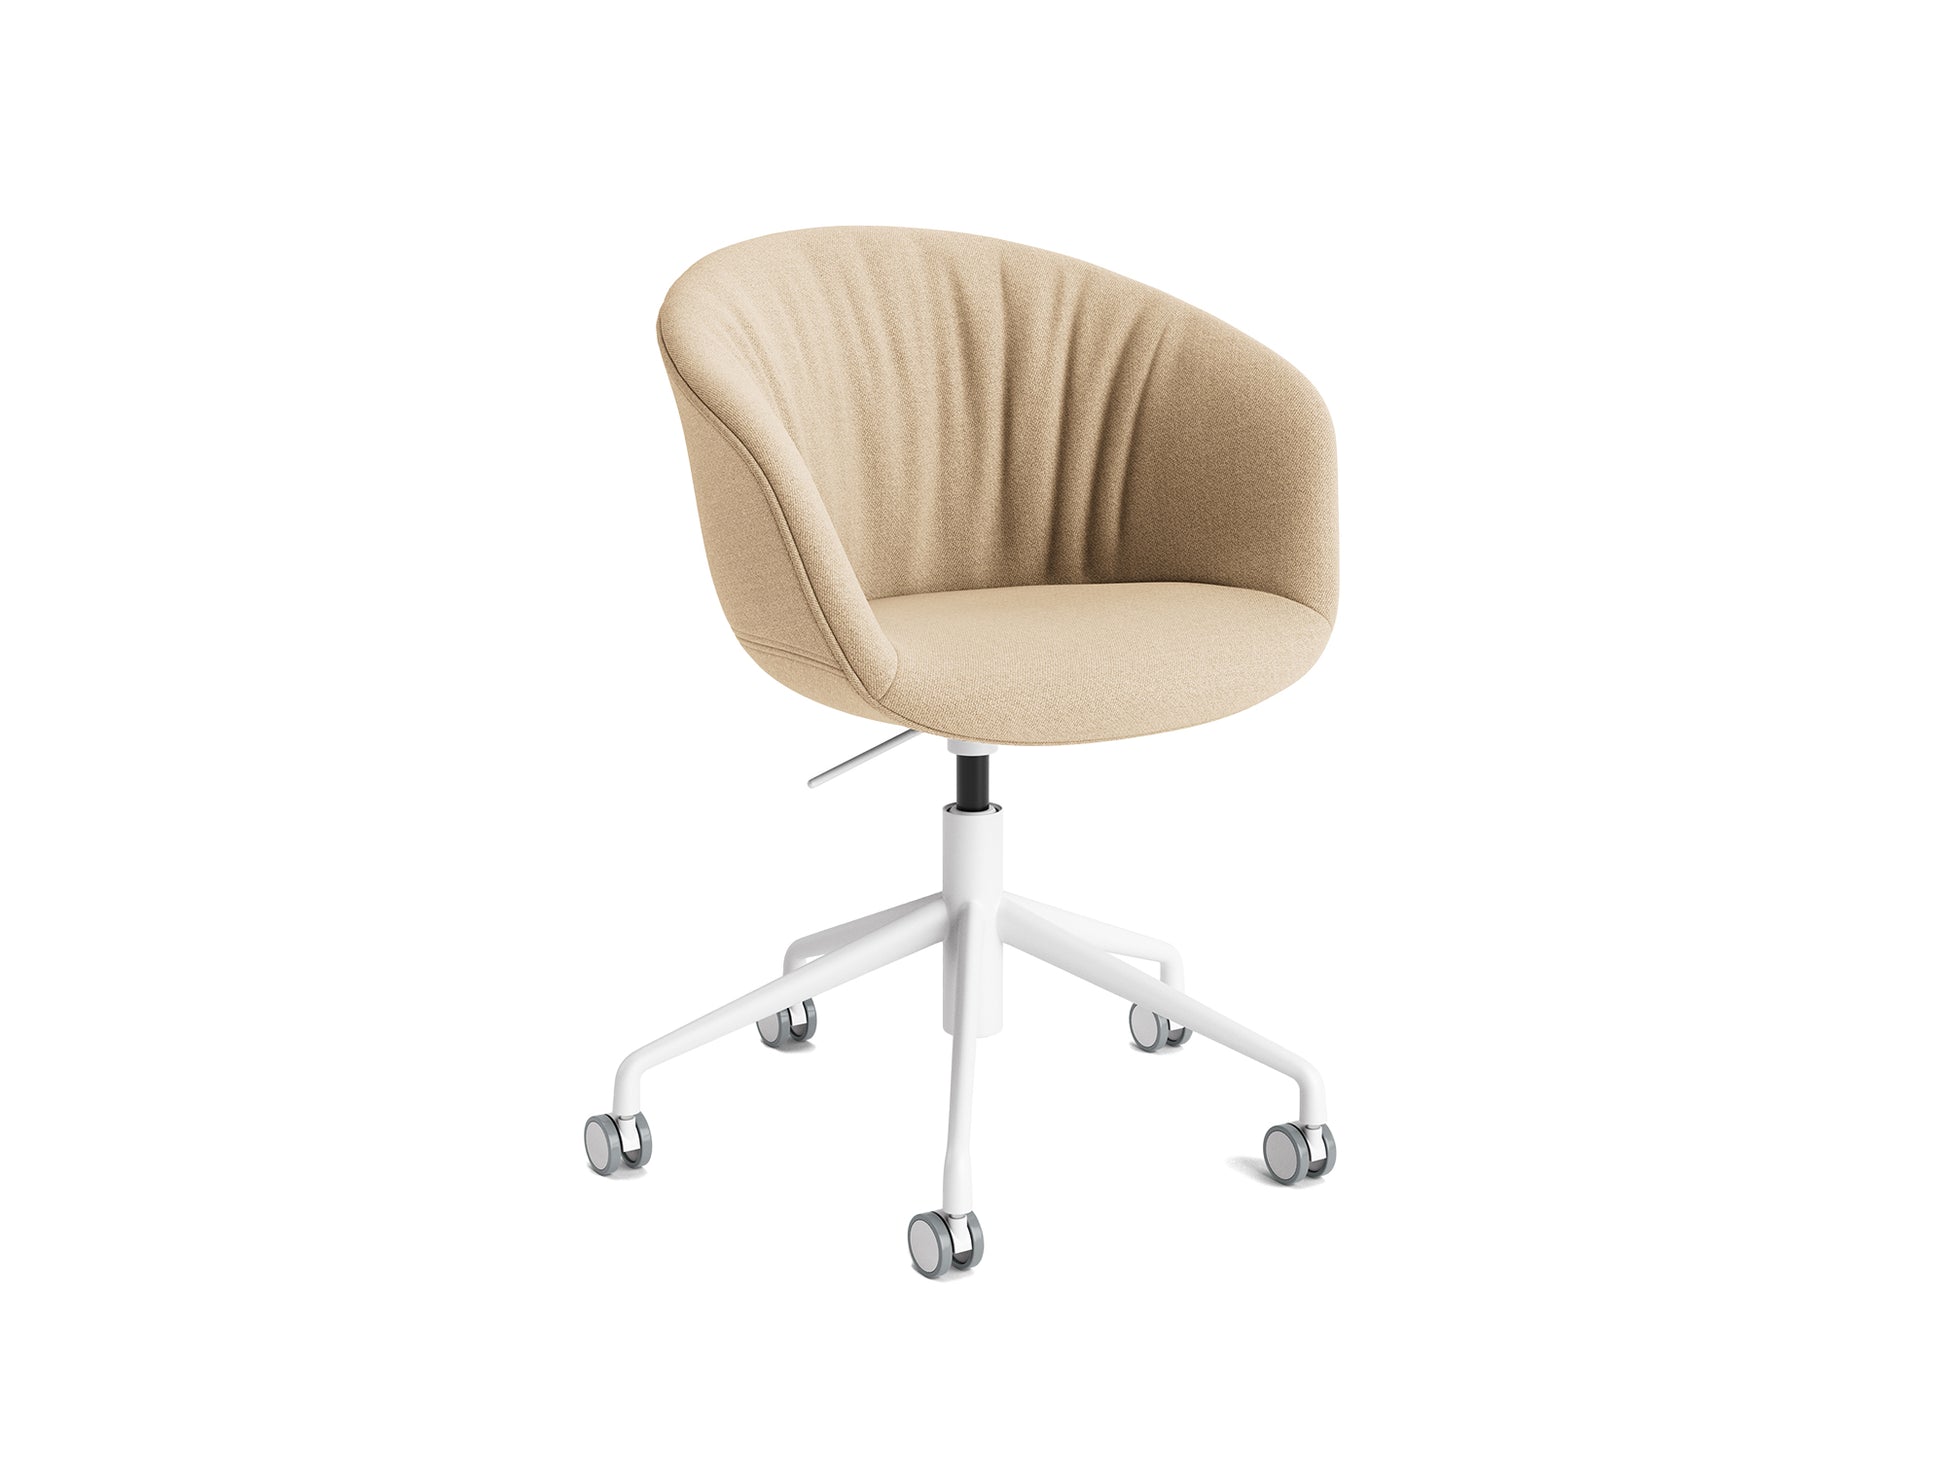 About A Chair AAC 53 Soft by HAY - Vidar 323 / White Powder Coated Aluminium